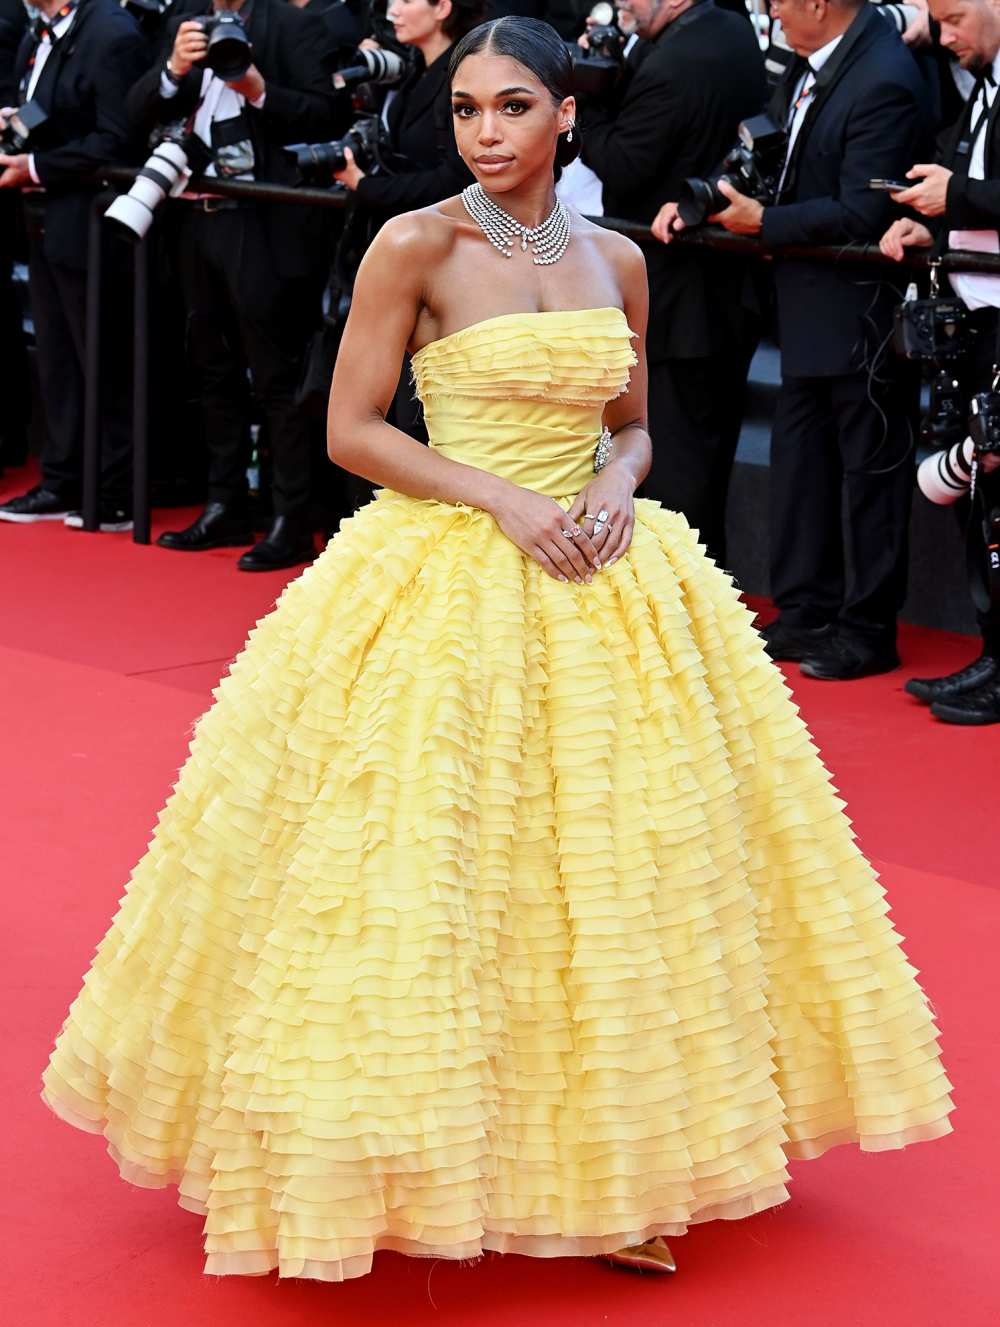 Lori Harvey Says She Felt Like 'Belle' as She Made Her Cannes Debut in Yellow Ruffled Gown